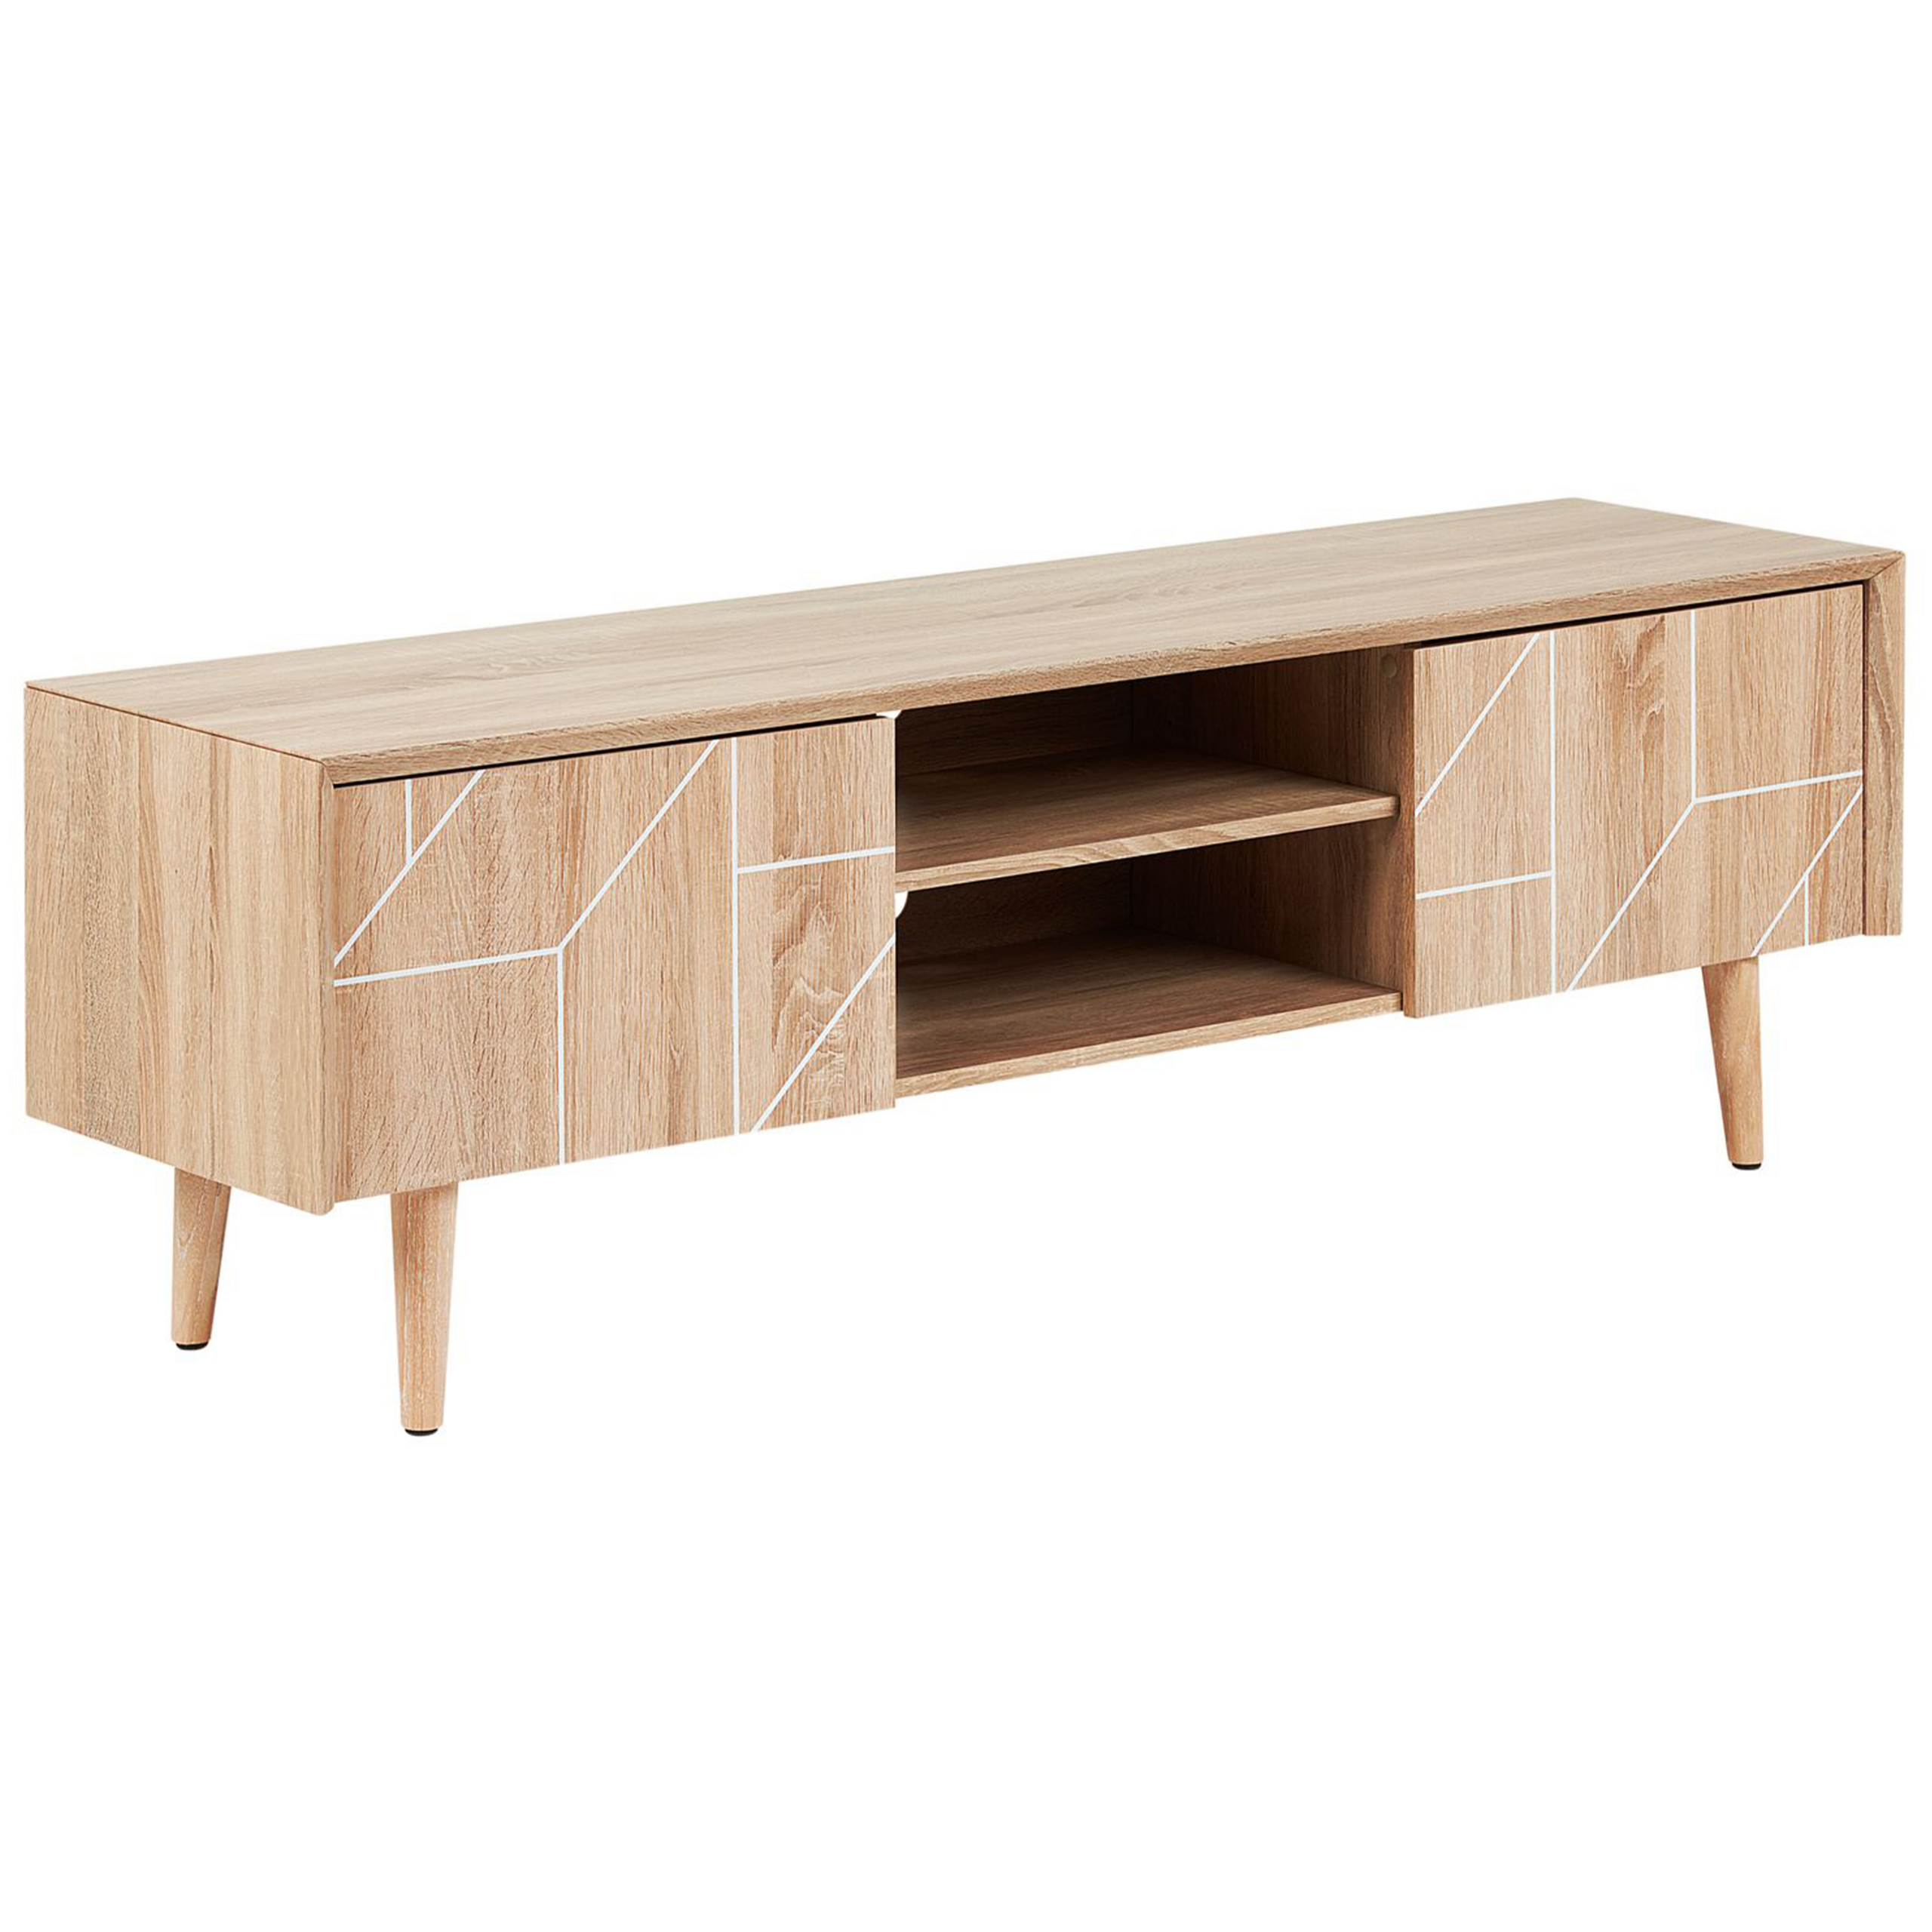 Beliani TV Stand Light Wood for up to 70ʺ TV Media Unit with 2 Cabinets Shelves